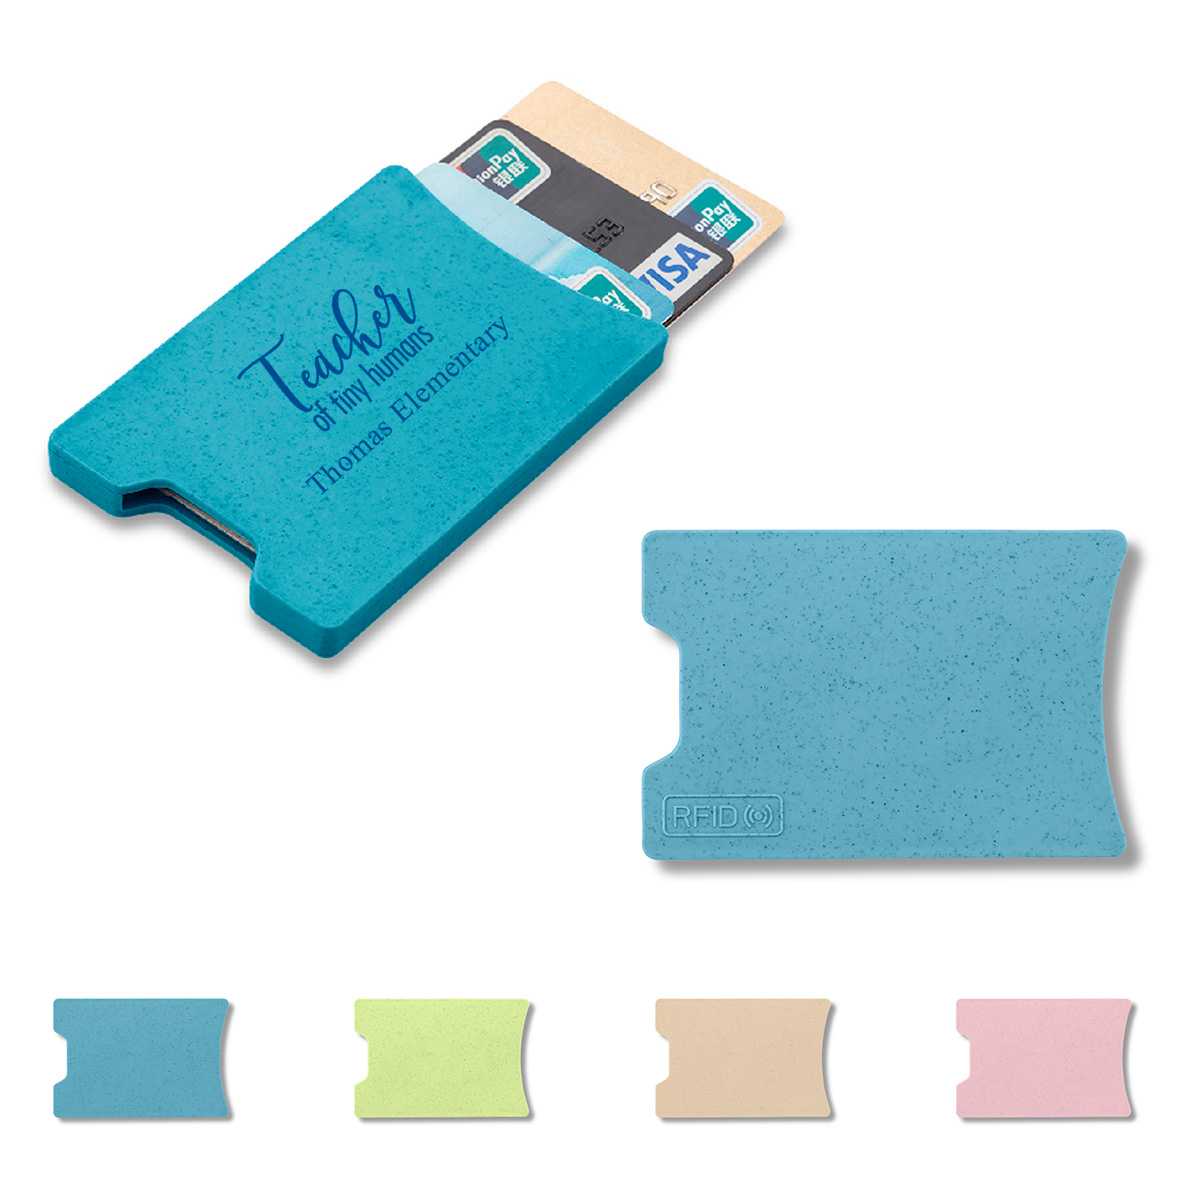 https://www.itselementary.com/-/media/Products/ie/teacher-appreciation-gifts/unique-gifts/elf1-wheat-straw-rfid-multi-card-case-000.ashx